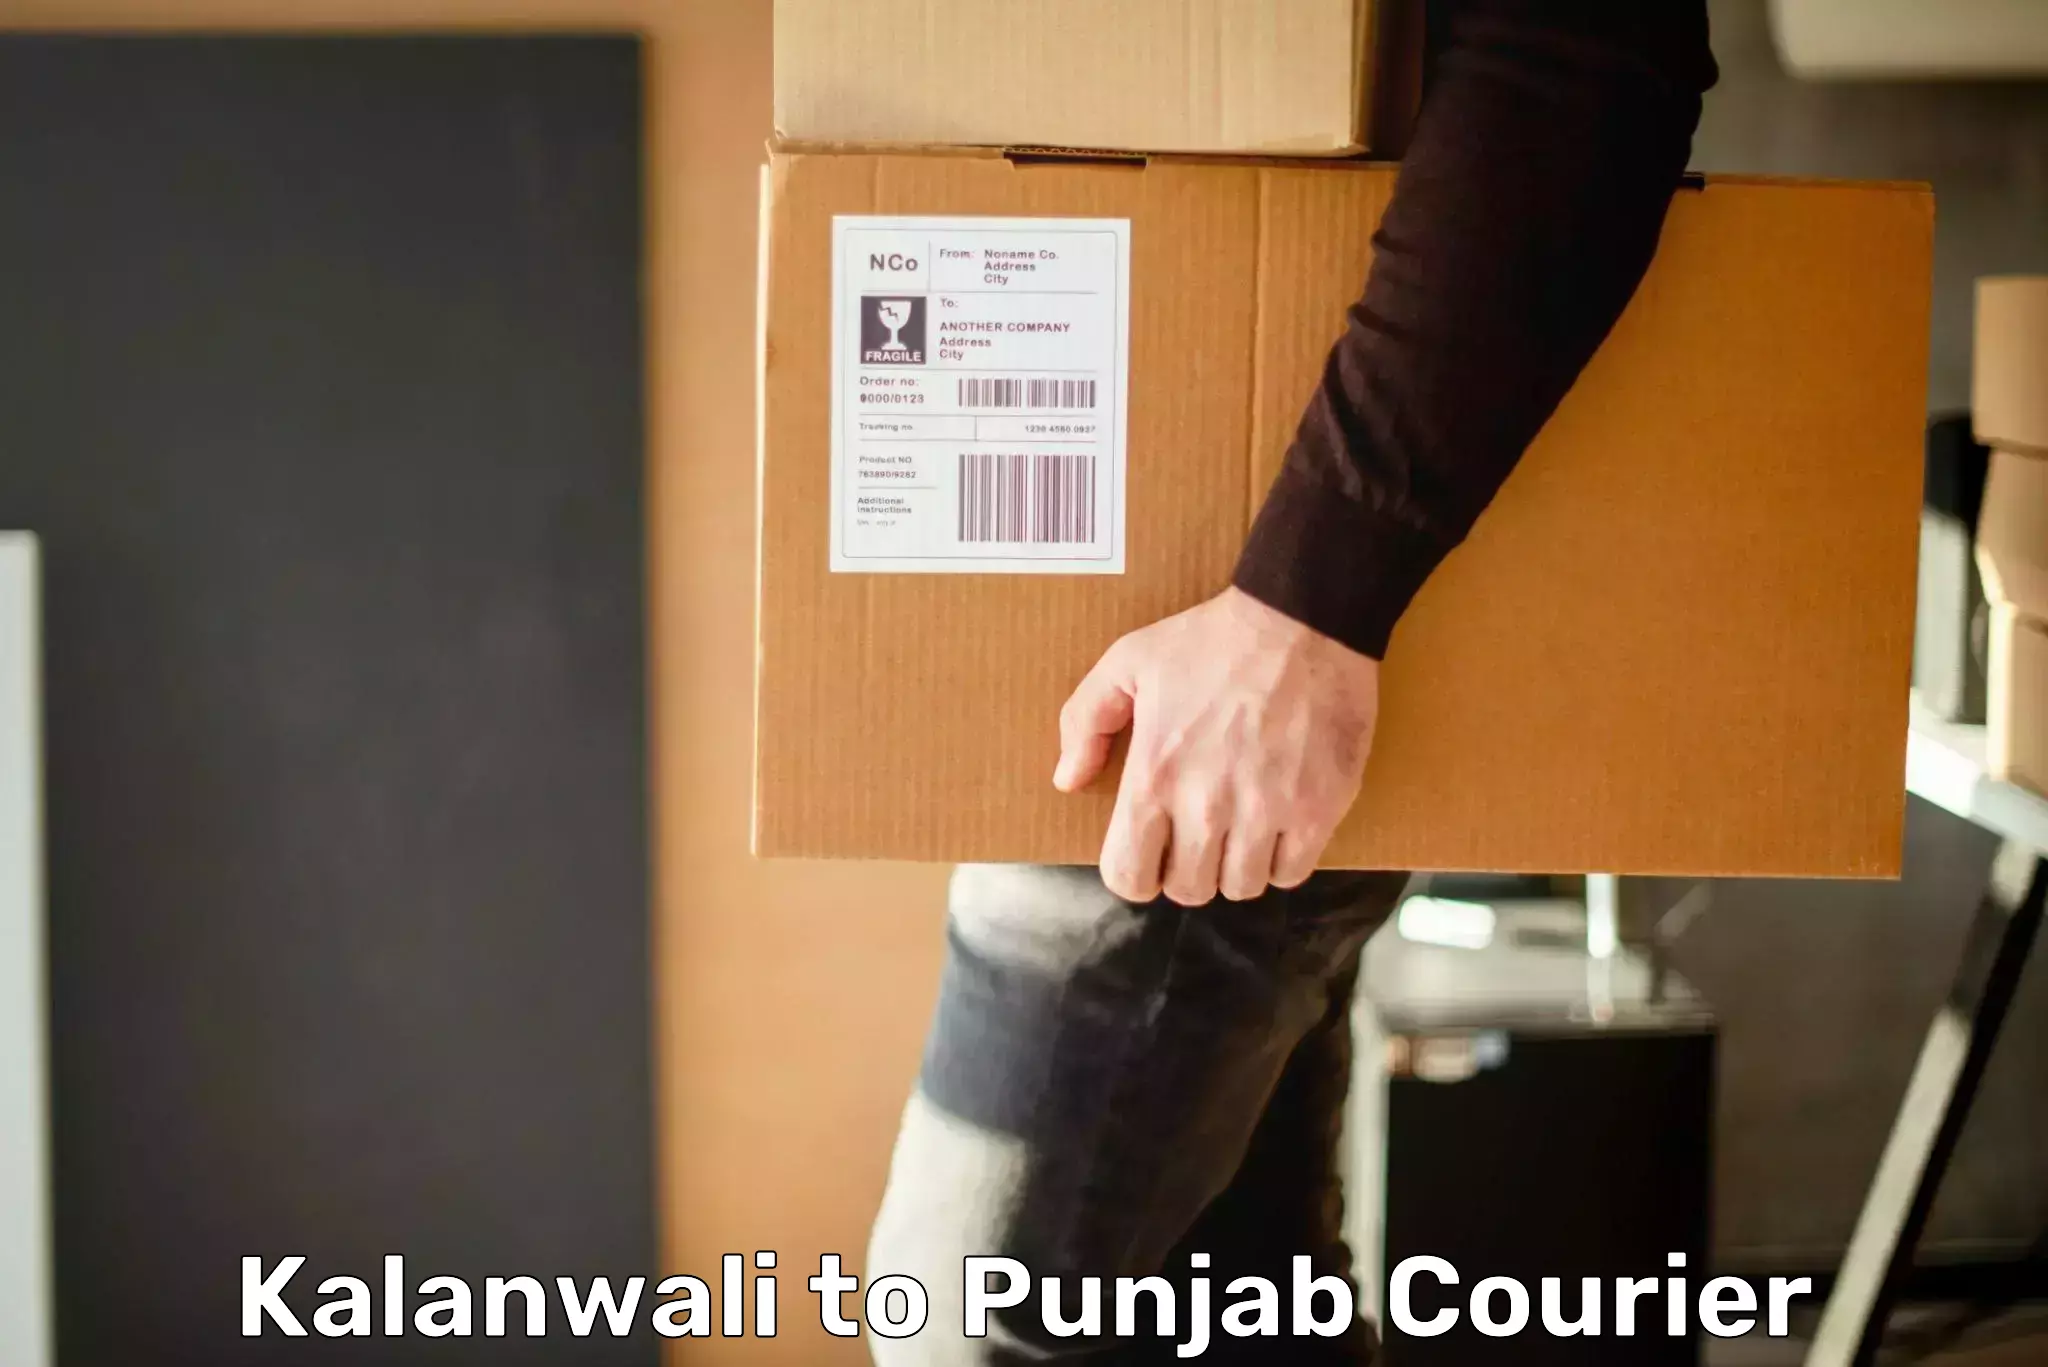 Express delivery capabilities in Kalanwali to Punjab